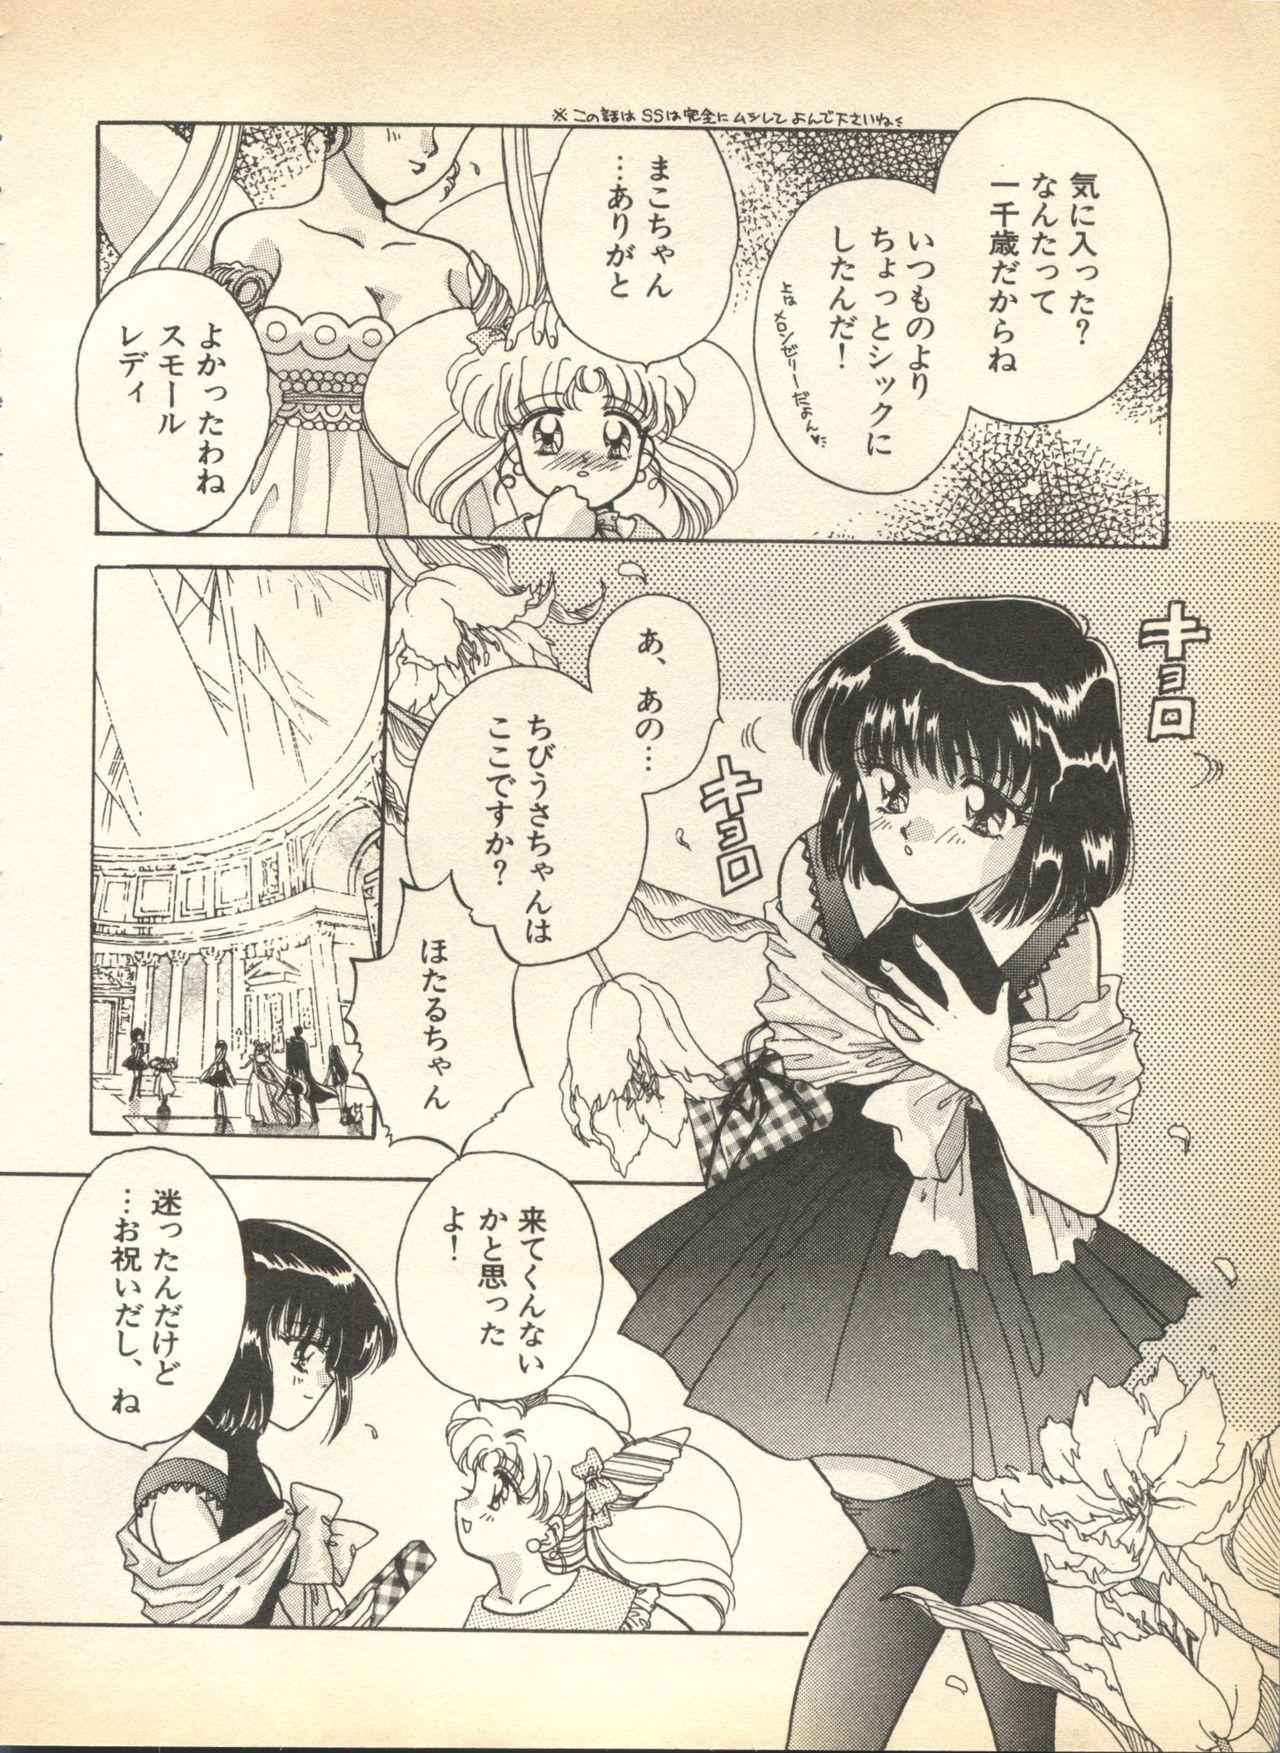 Toy Lunatic Party 8 - Sailor moon Cheating Wife - Page 8